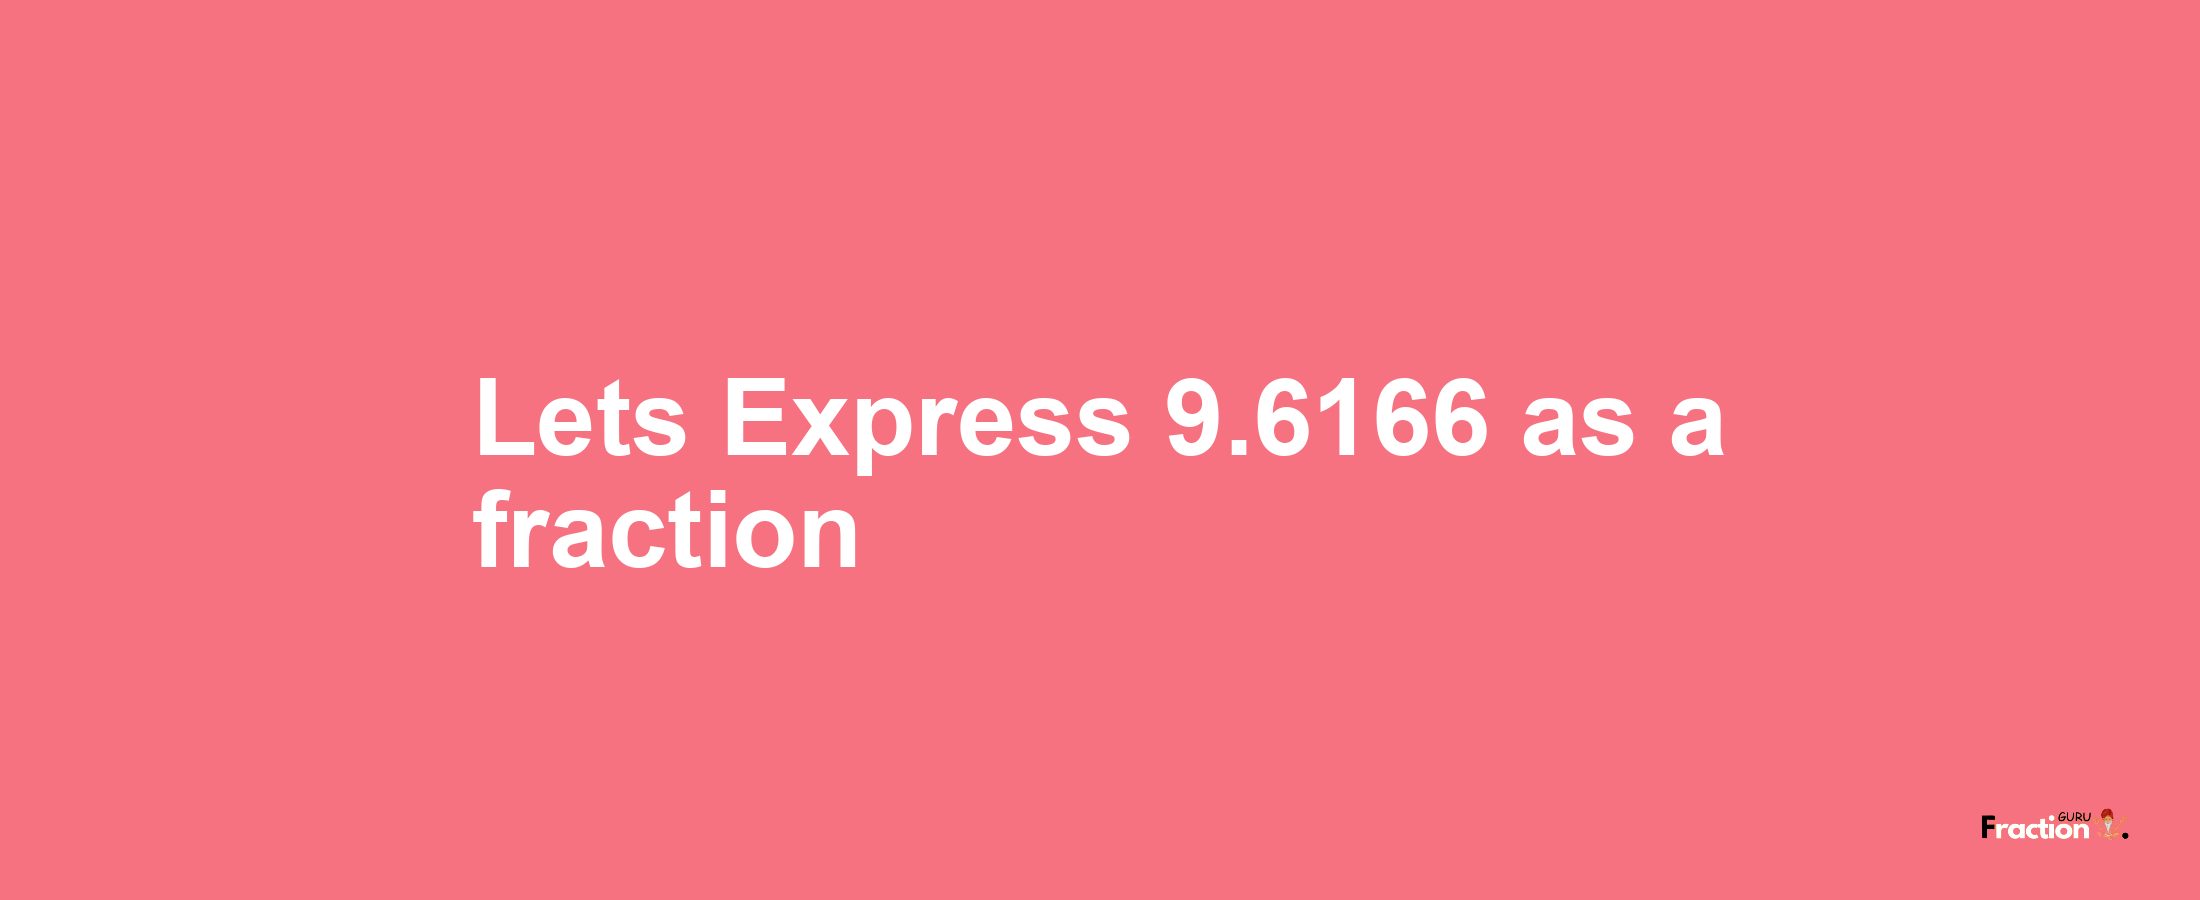 Lets Express 9.6166 as afraction